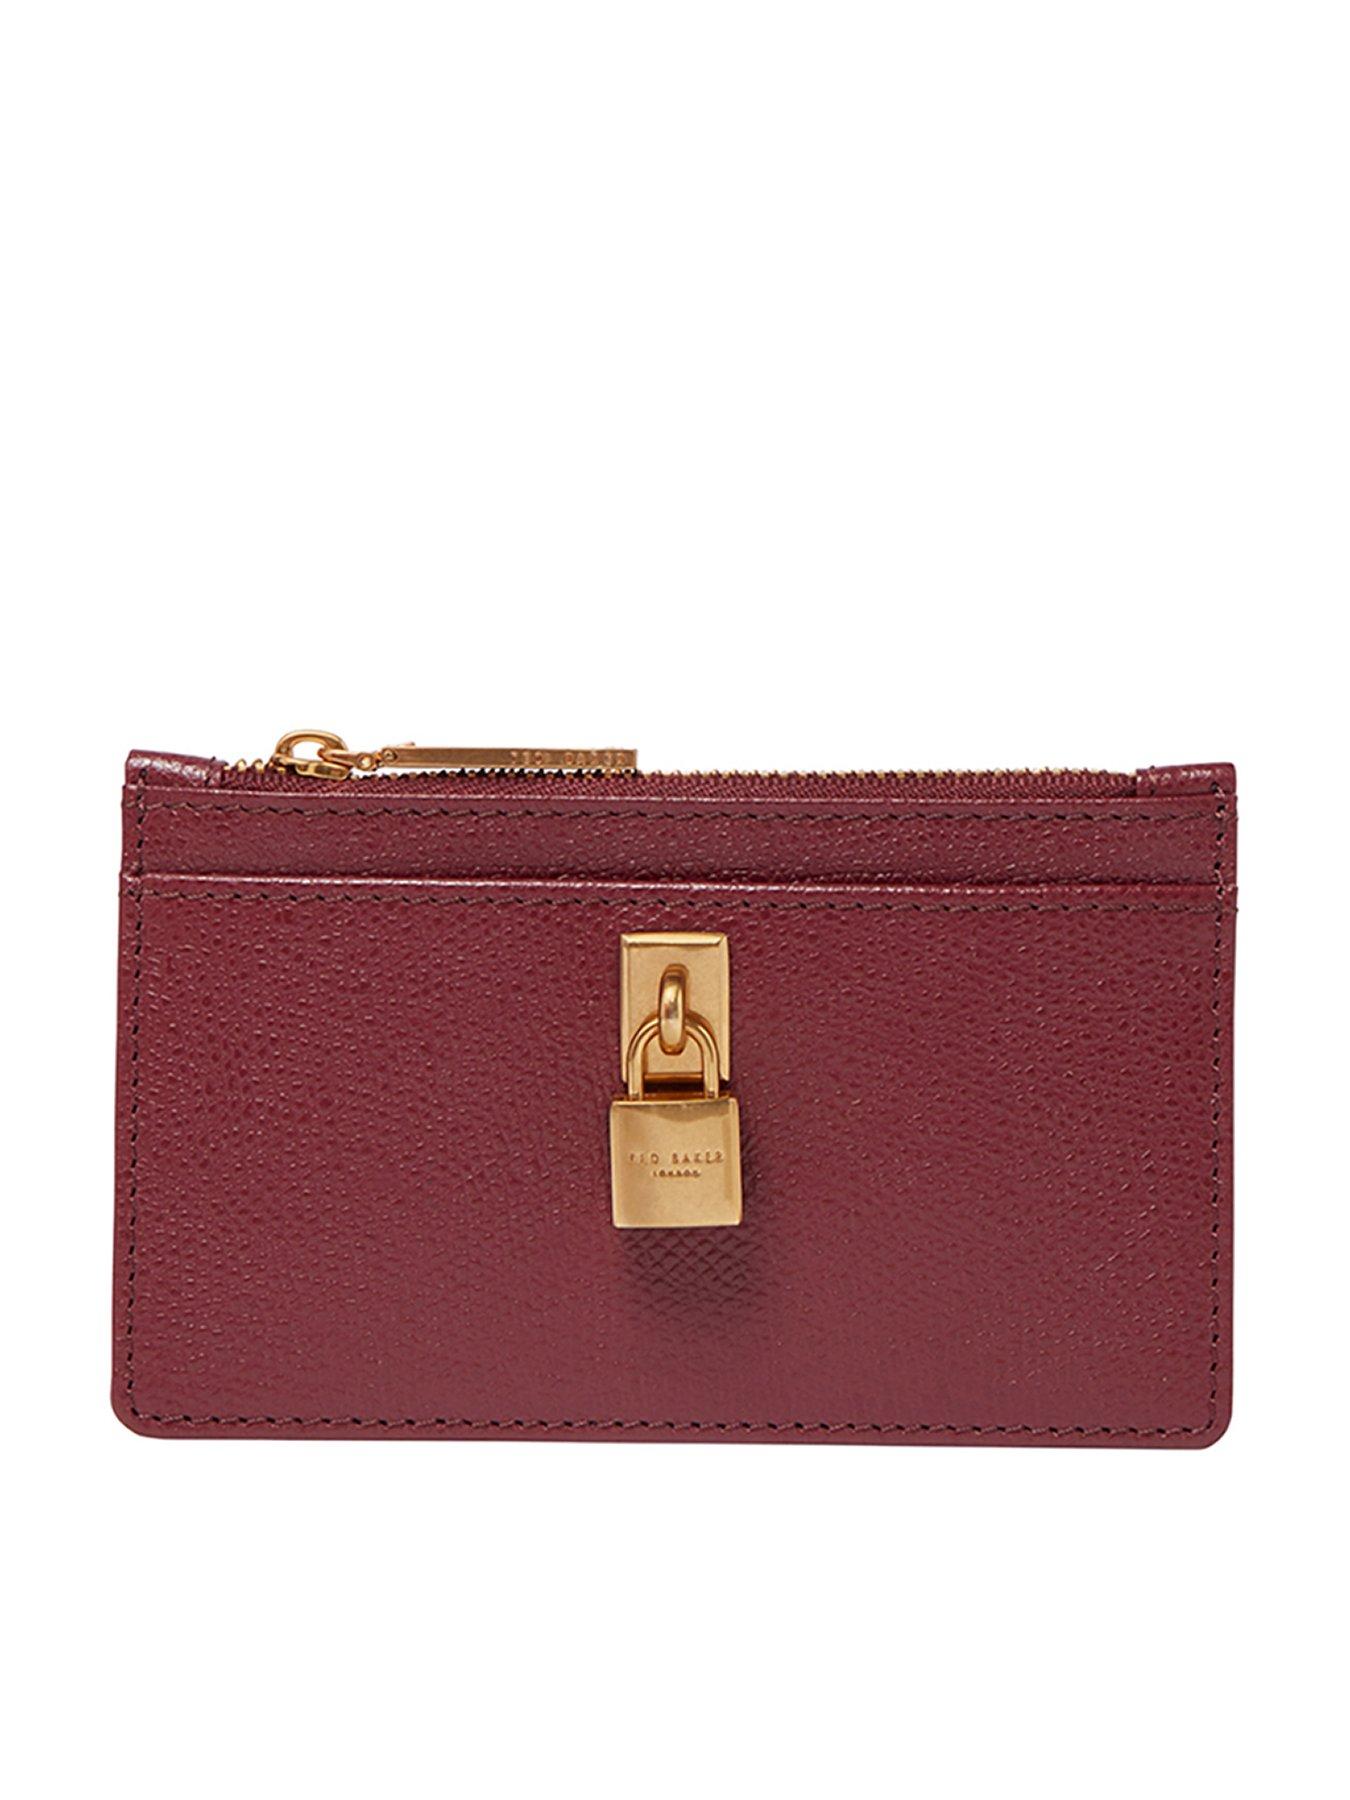 Women's Bags – Ted Baker, United States